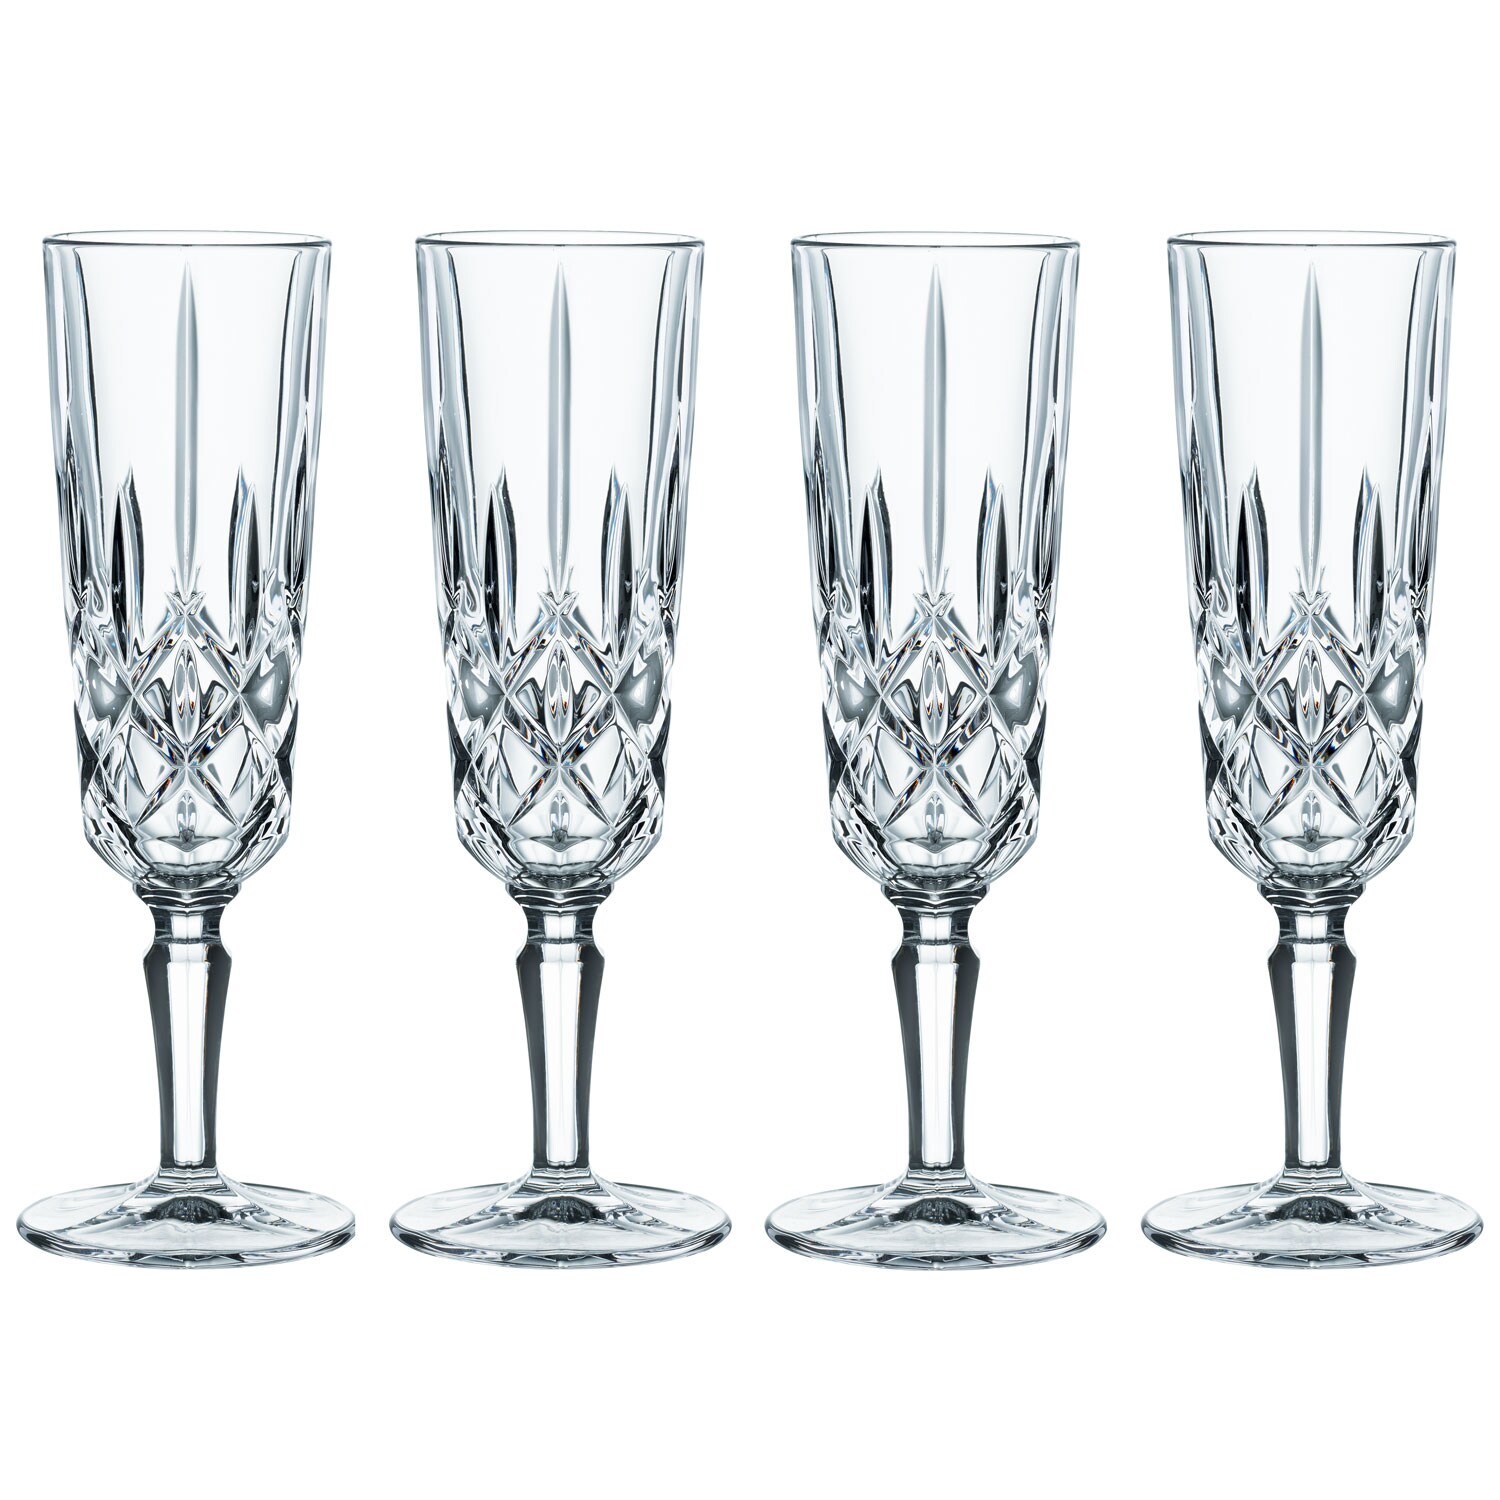 Noblesse Champagne Glasses 15,5cl, 4-Pack - Nachtmann